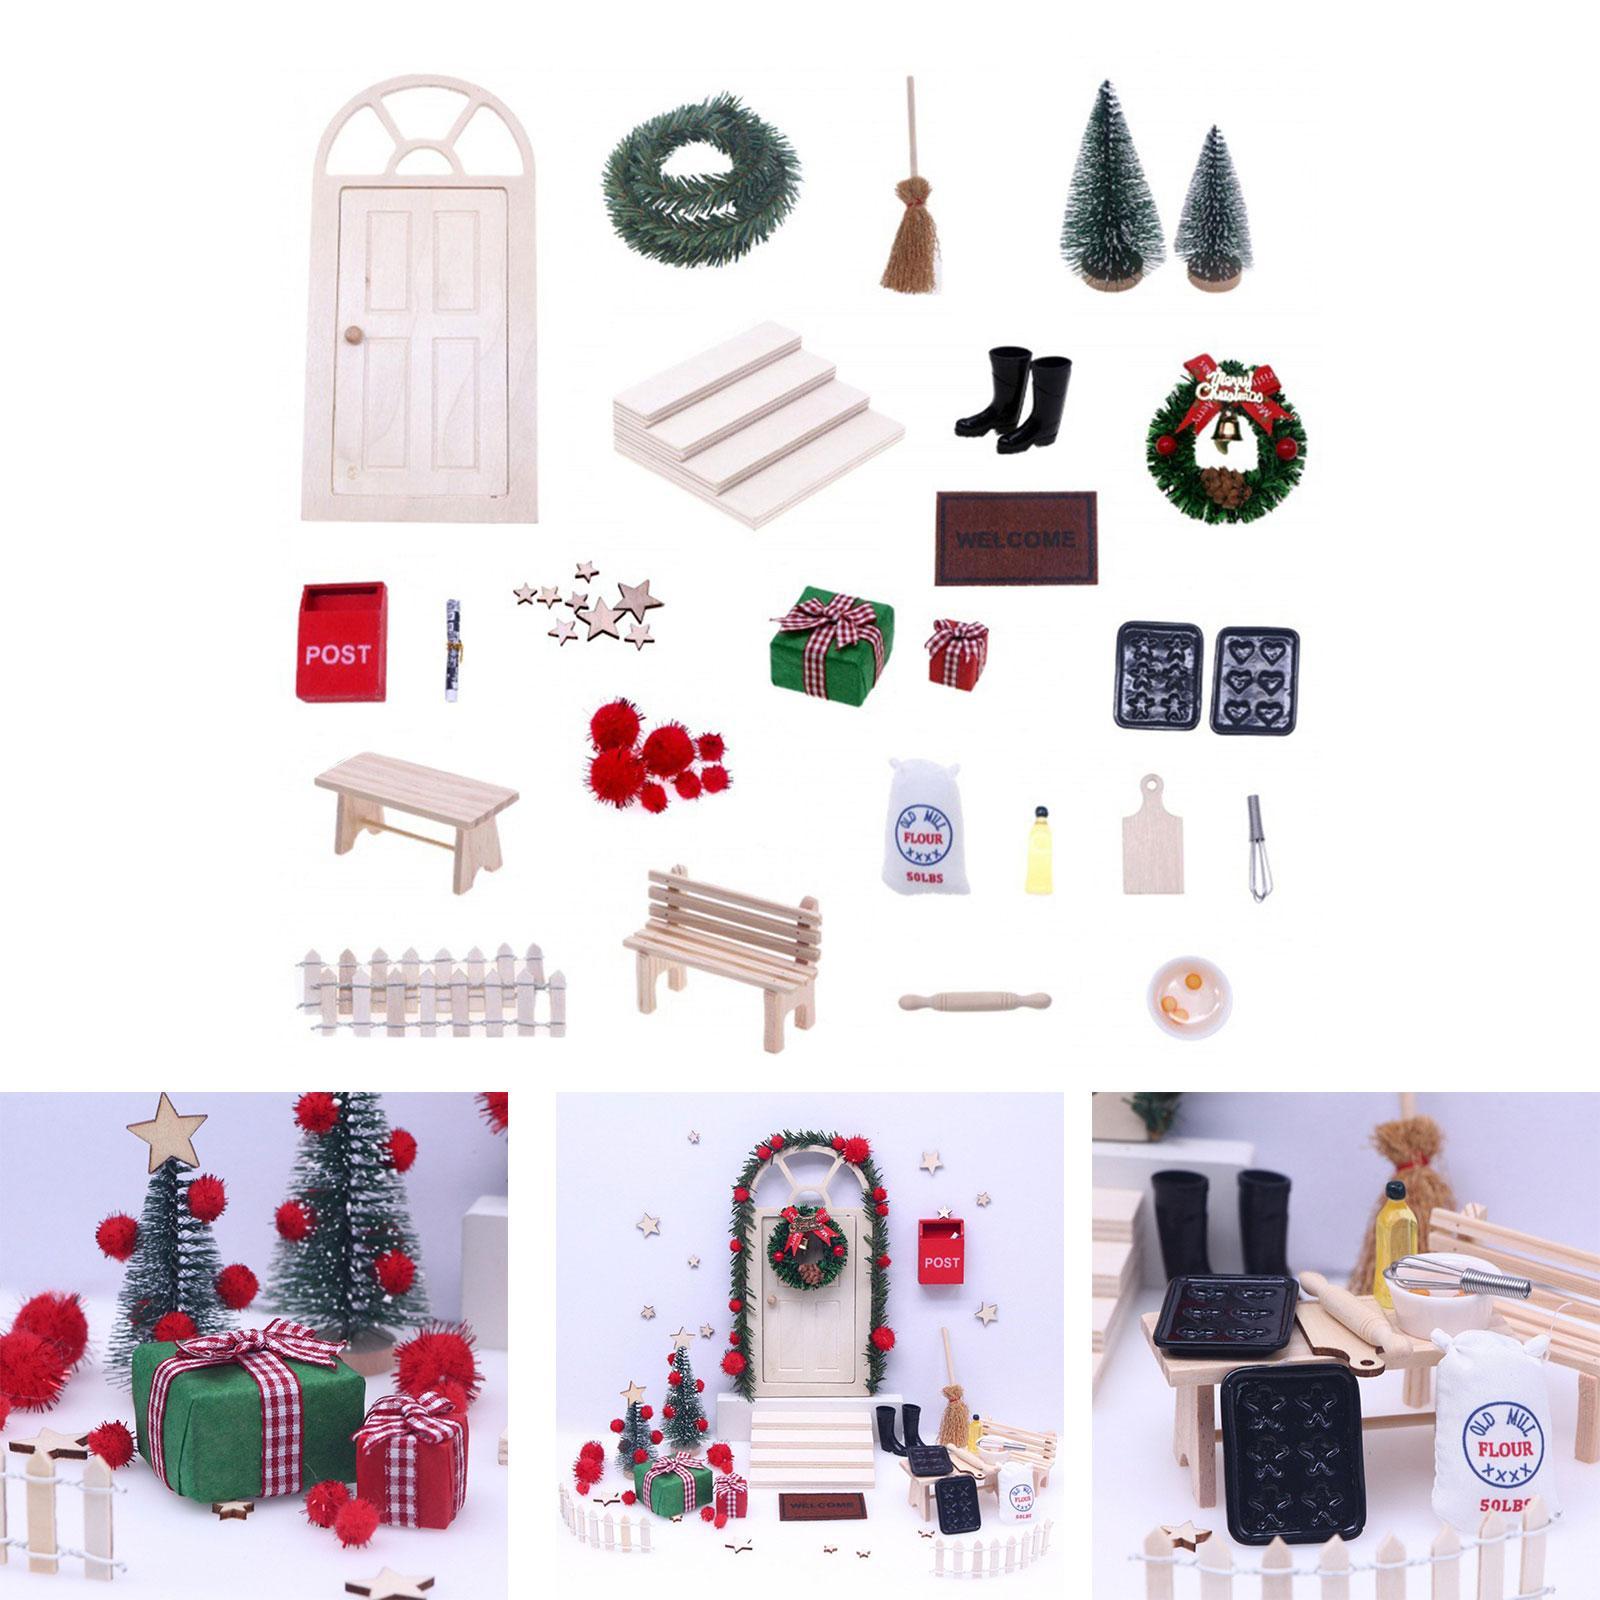 27Pcs Tiny Fairy Wooden Doors Xmas Miniature Decorations, 1:12 Doll House Scene Props for Railroad Architectural